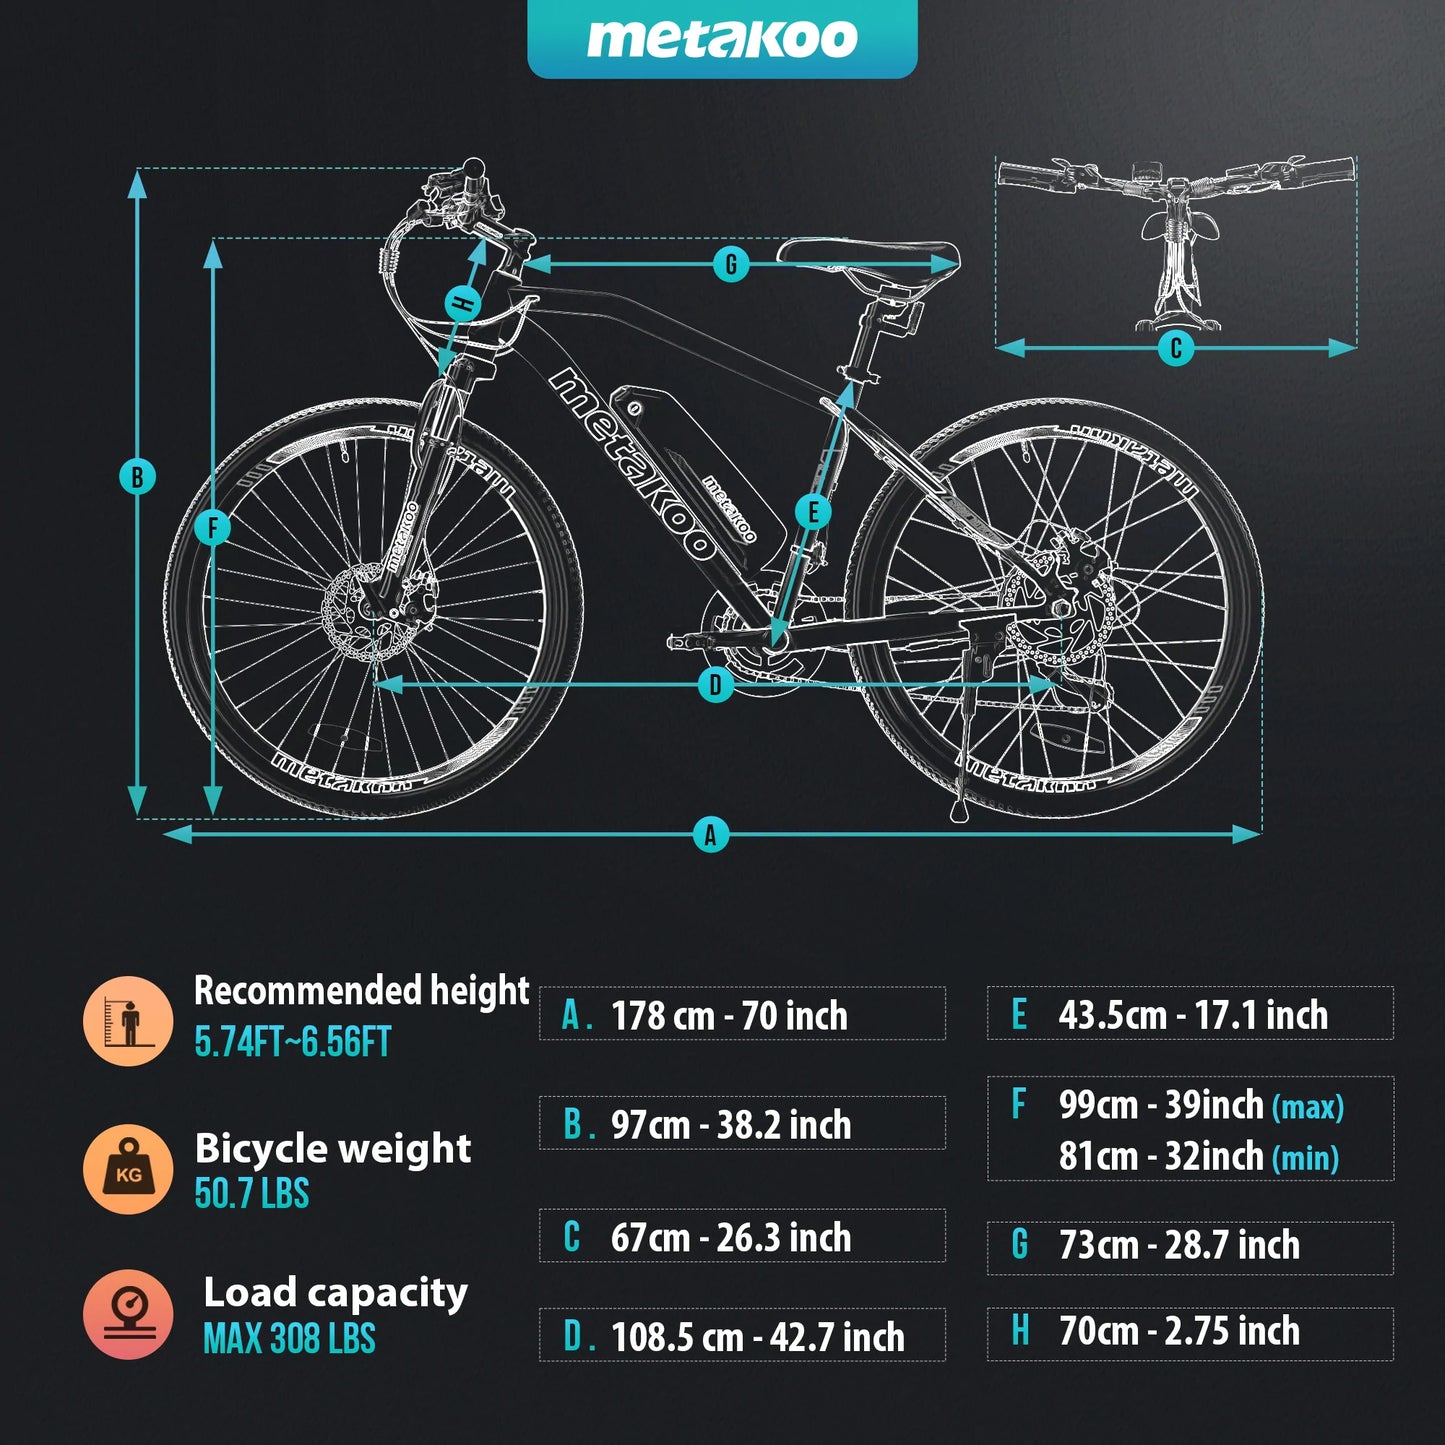 CA Warehouse Stock Cybertrack 300 27.5*2.1" Tire Electric Bike with 500W Motor 48V 10.4Ah Battery